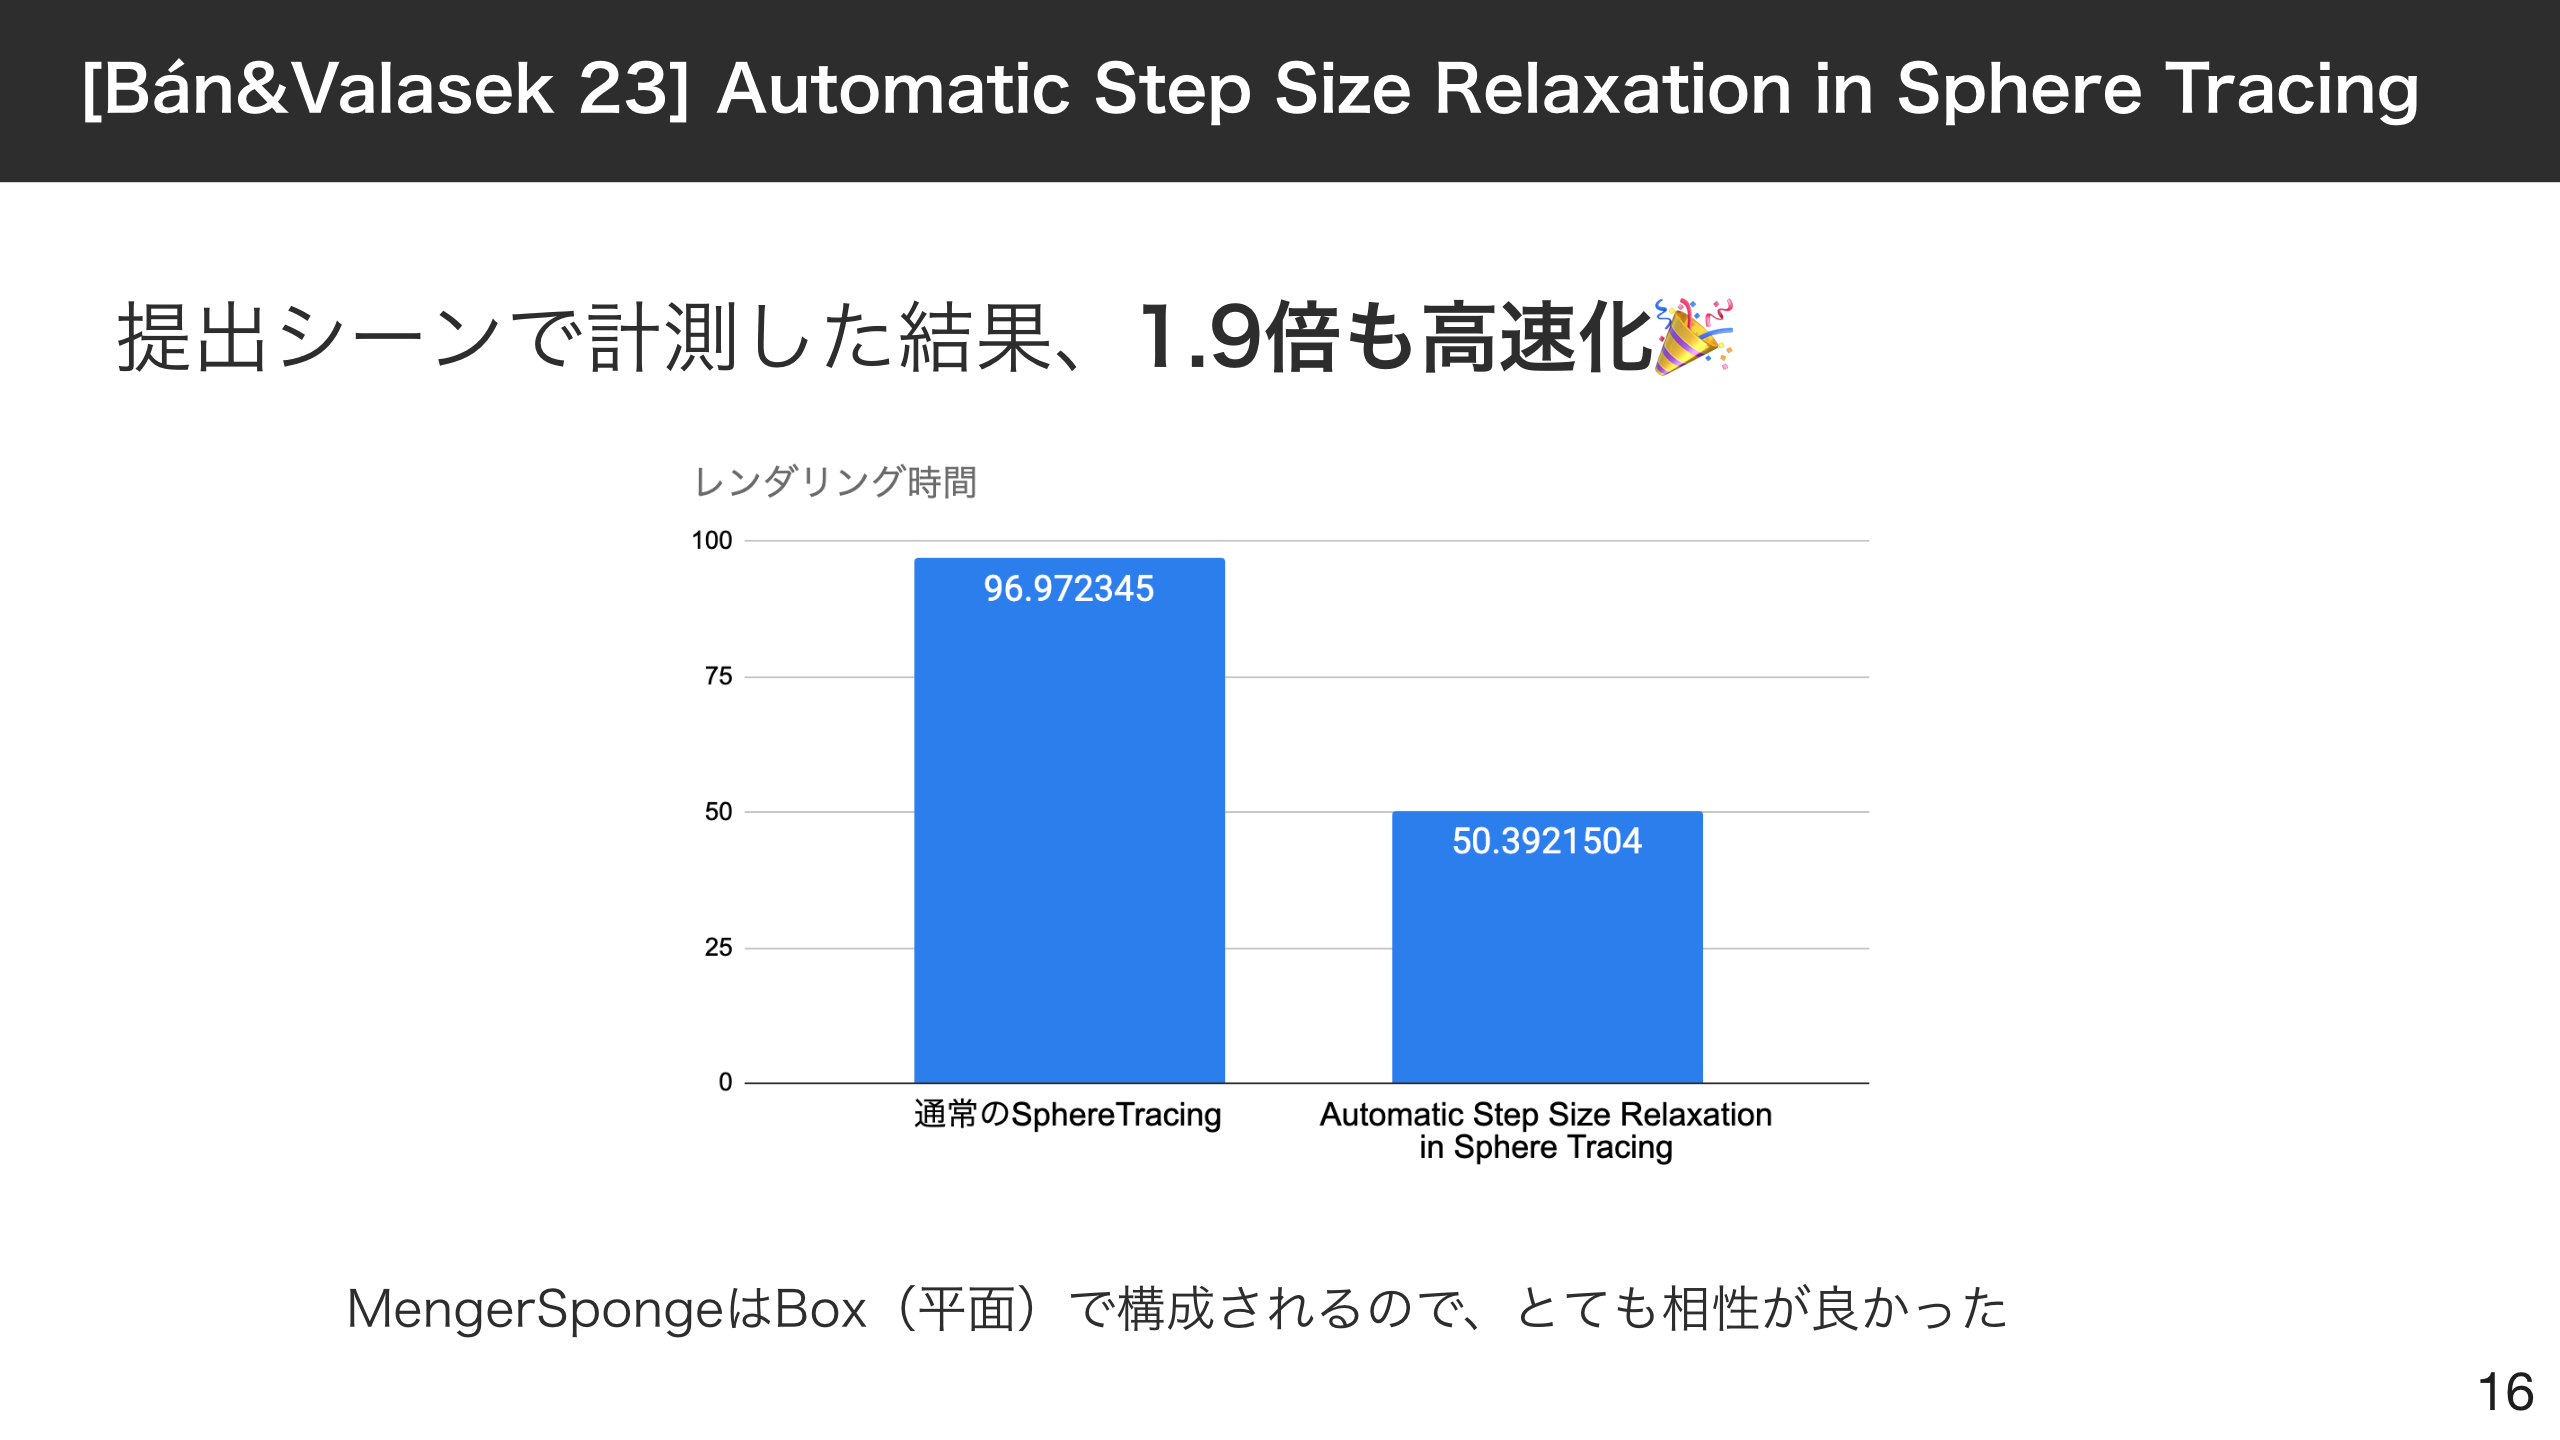 [Bán&Valasek 23] Automatic Step Size Relaxation in Sphere Tracingの結果